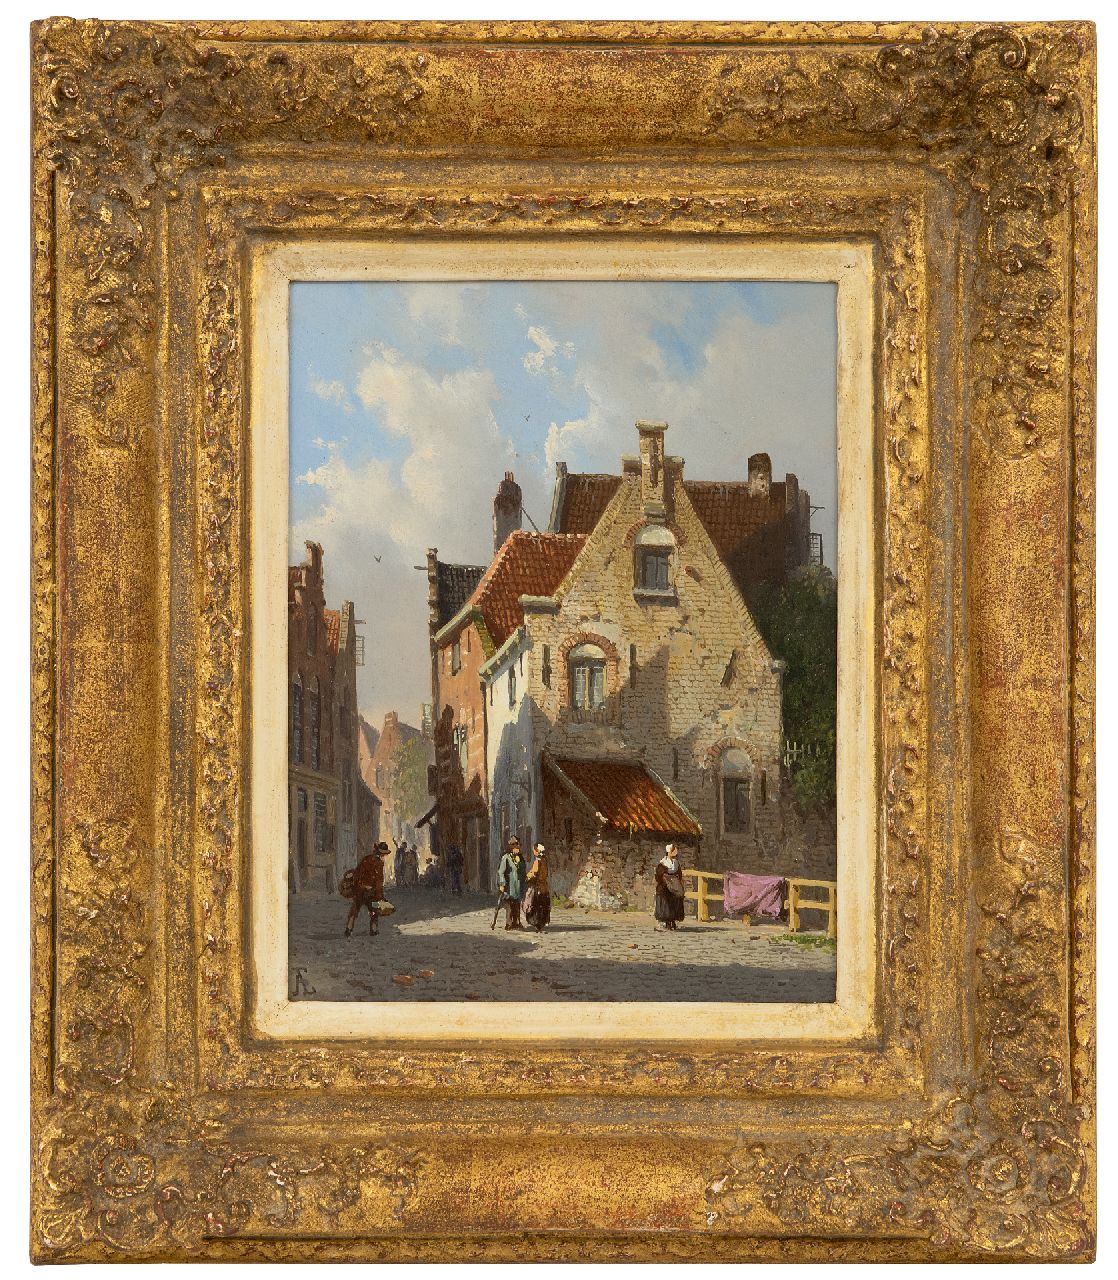 Eversen A.  | Adrianus Eversen | Paintings offered for sale | Sonnige Straße mit Figuren, oil on panel 19.1 x 14.5 cm, signed l.l. with monogram